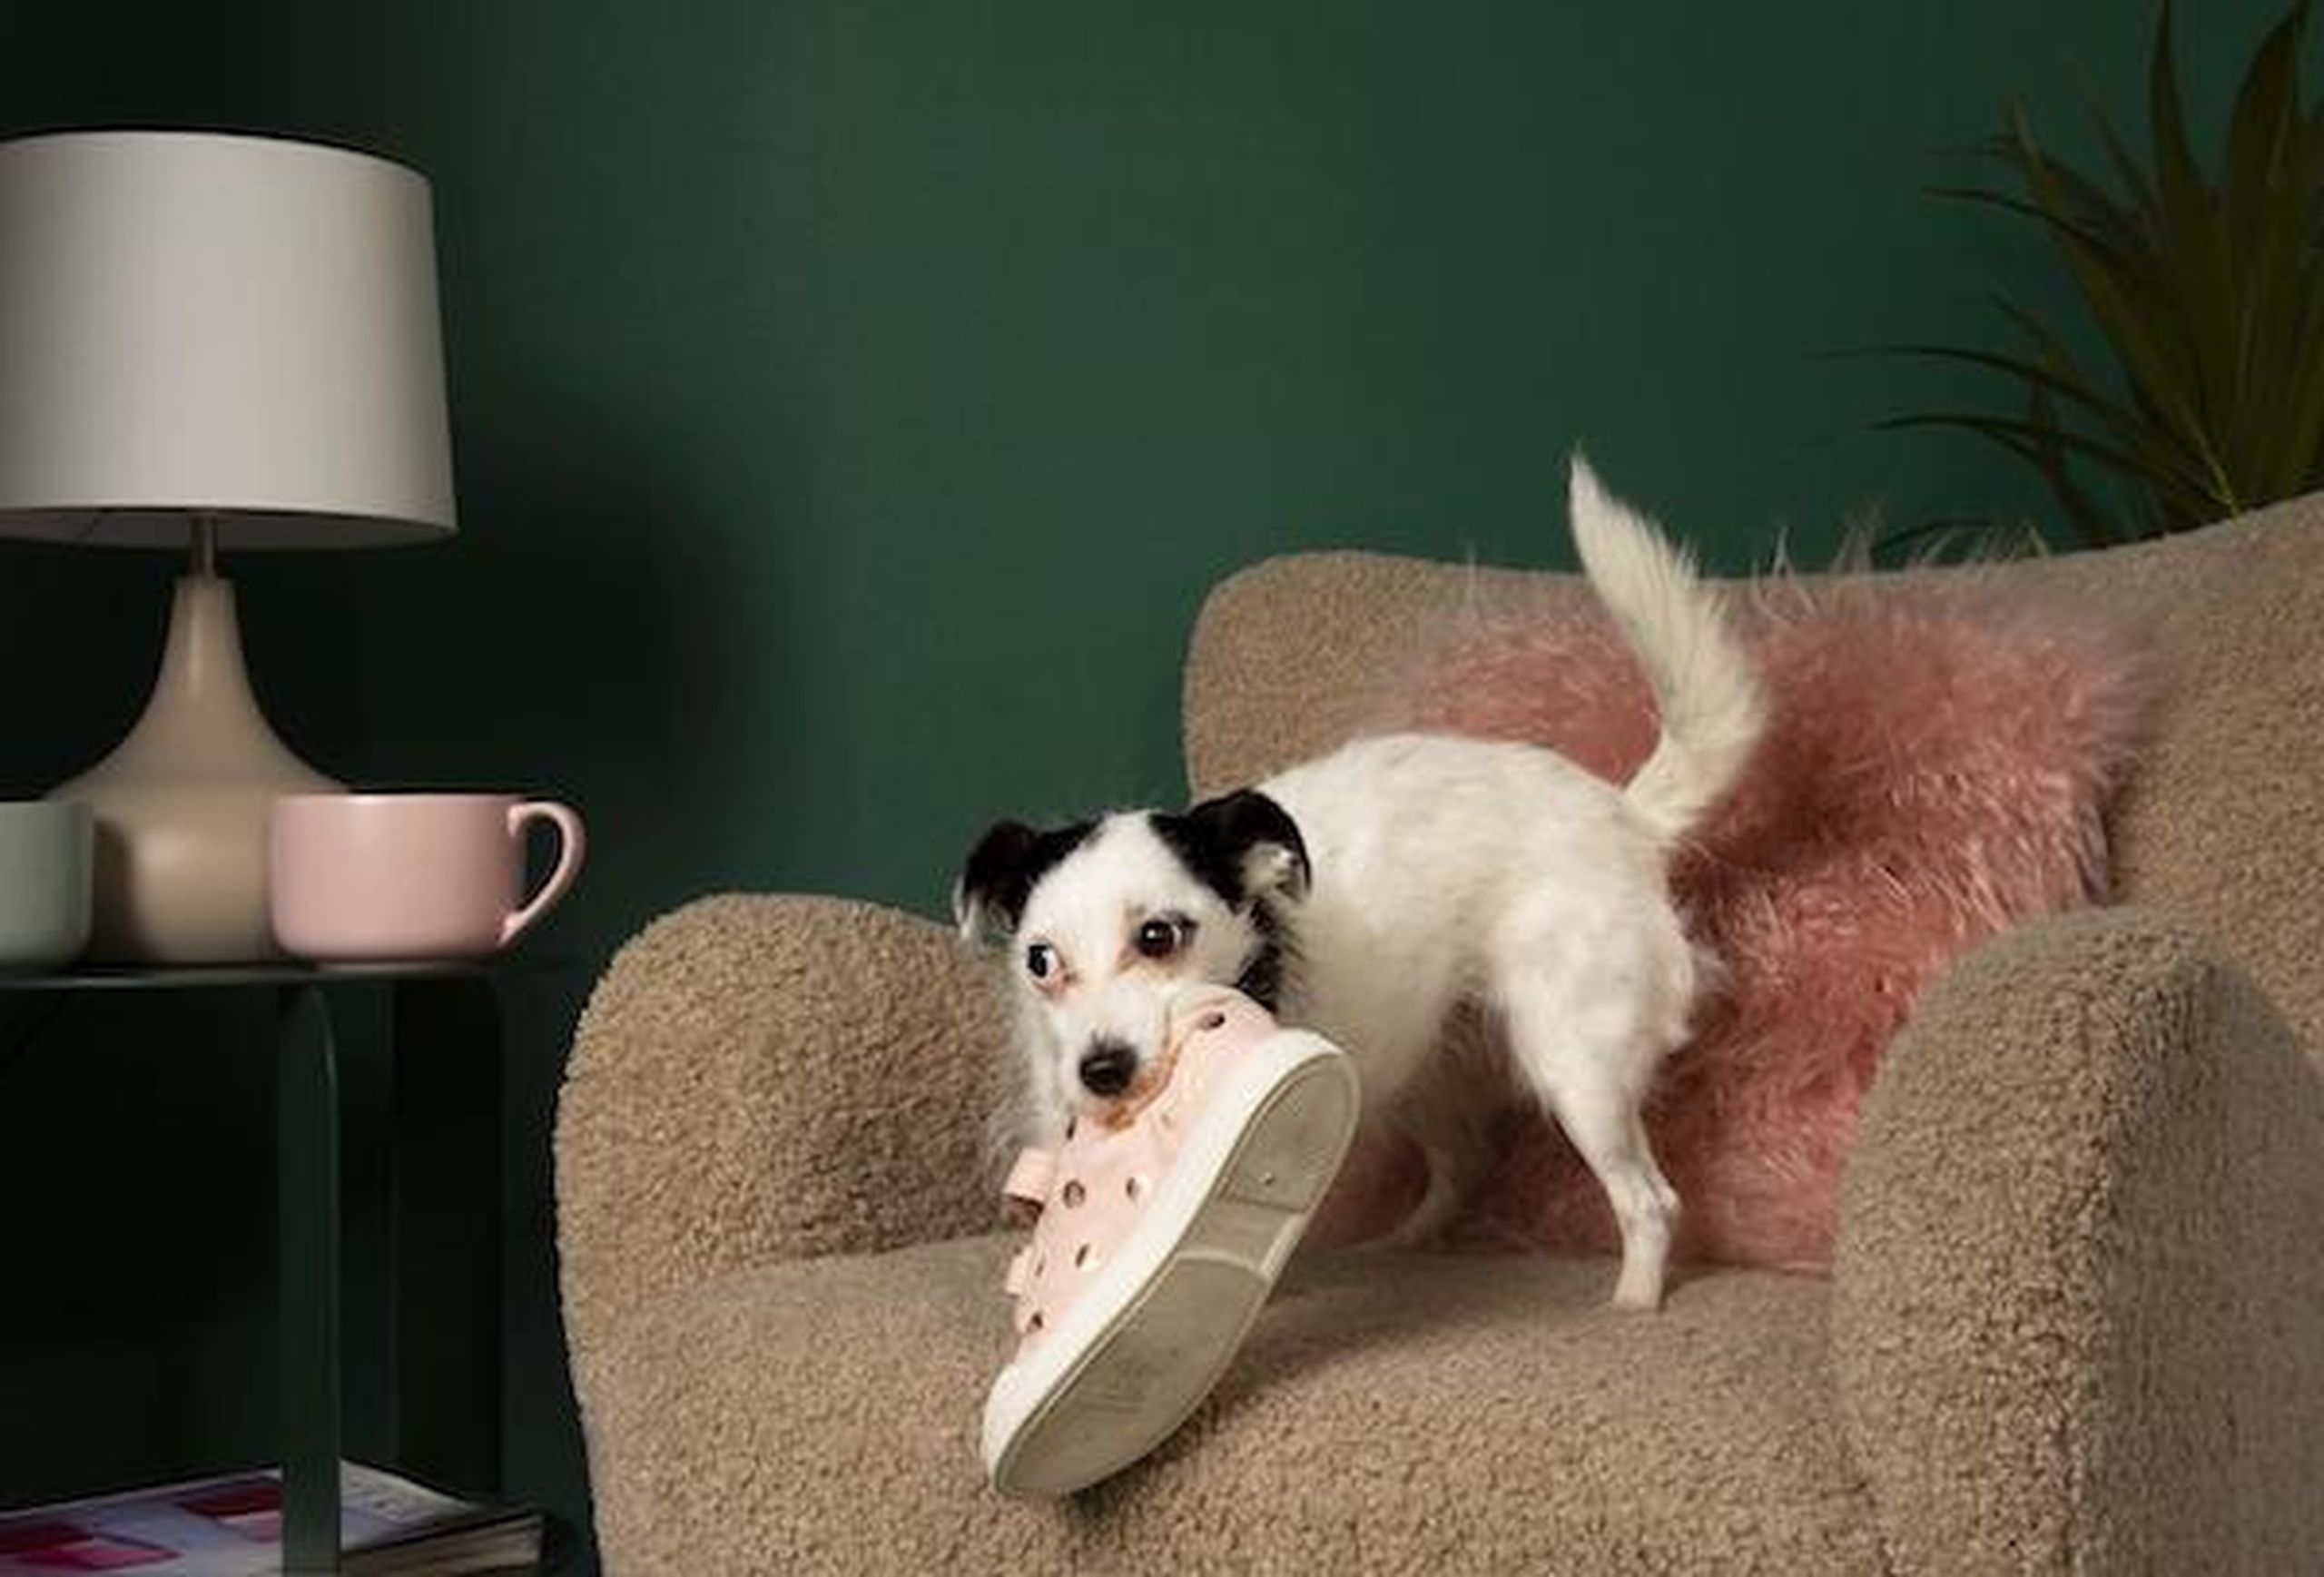 Dog on a chair eating a shoe